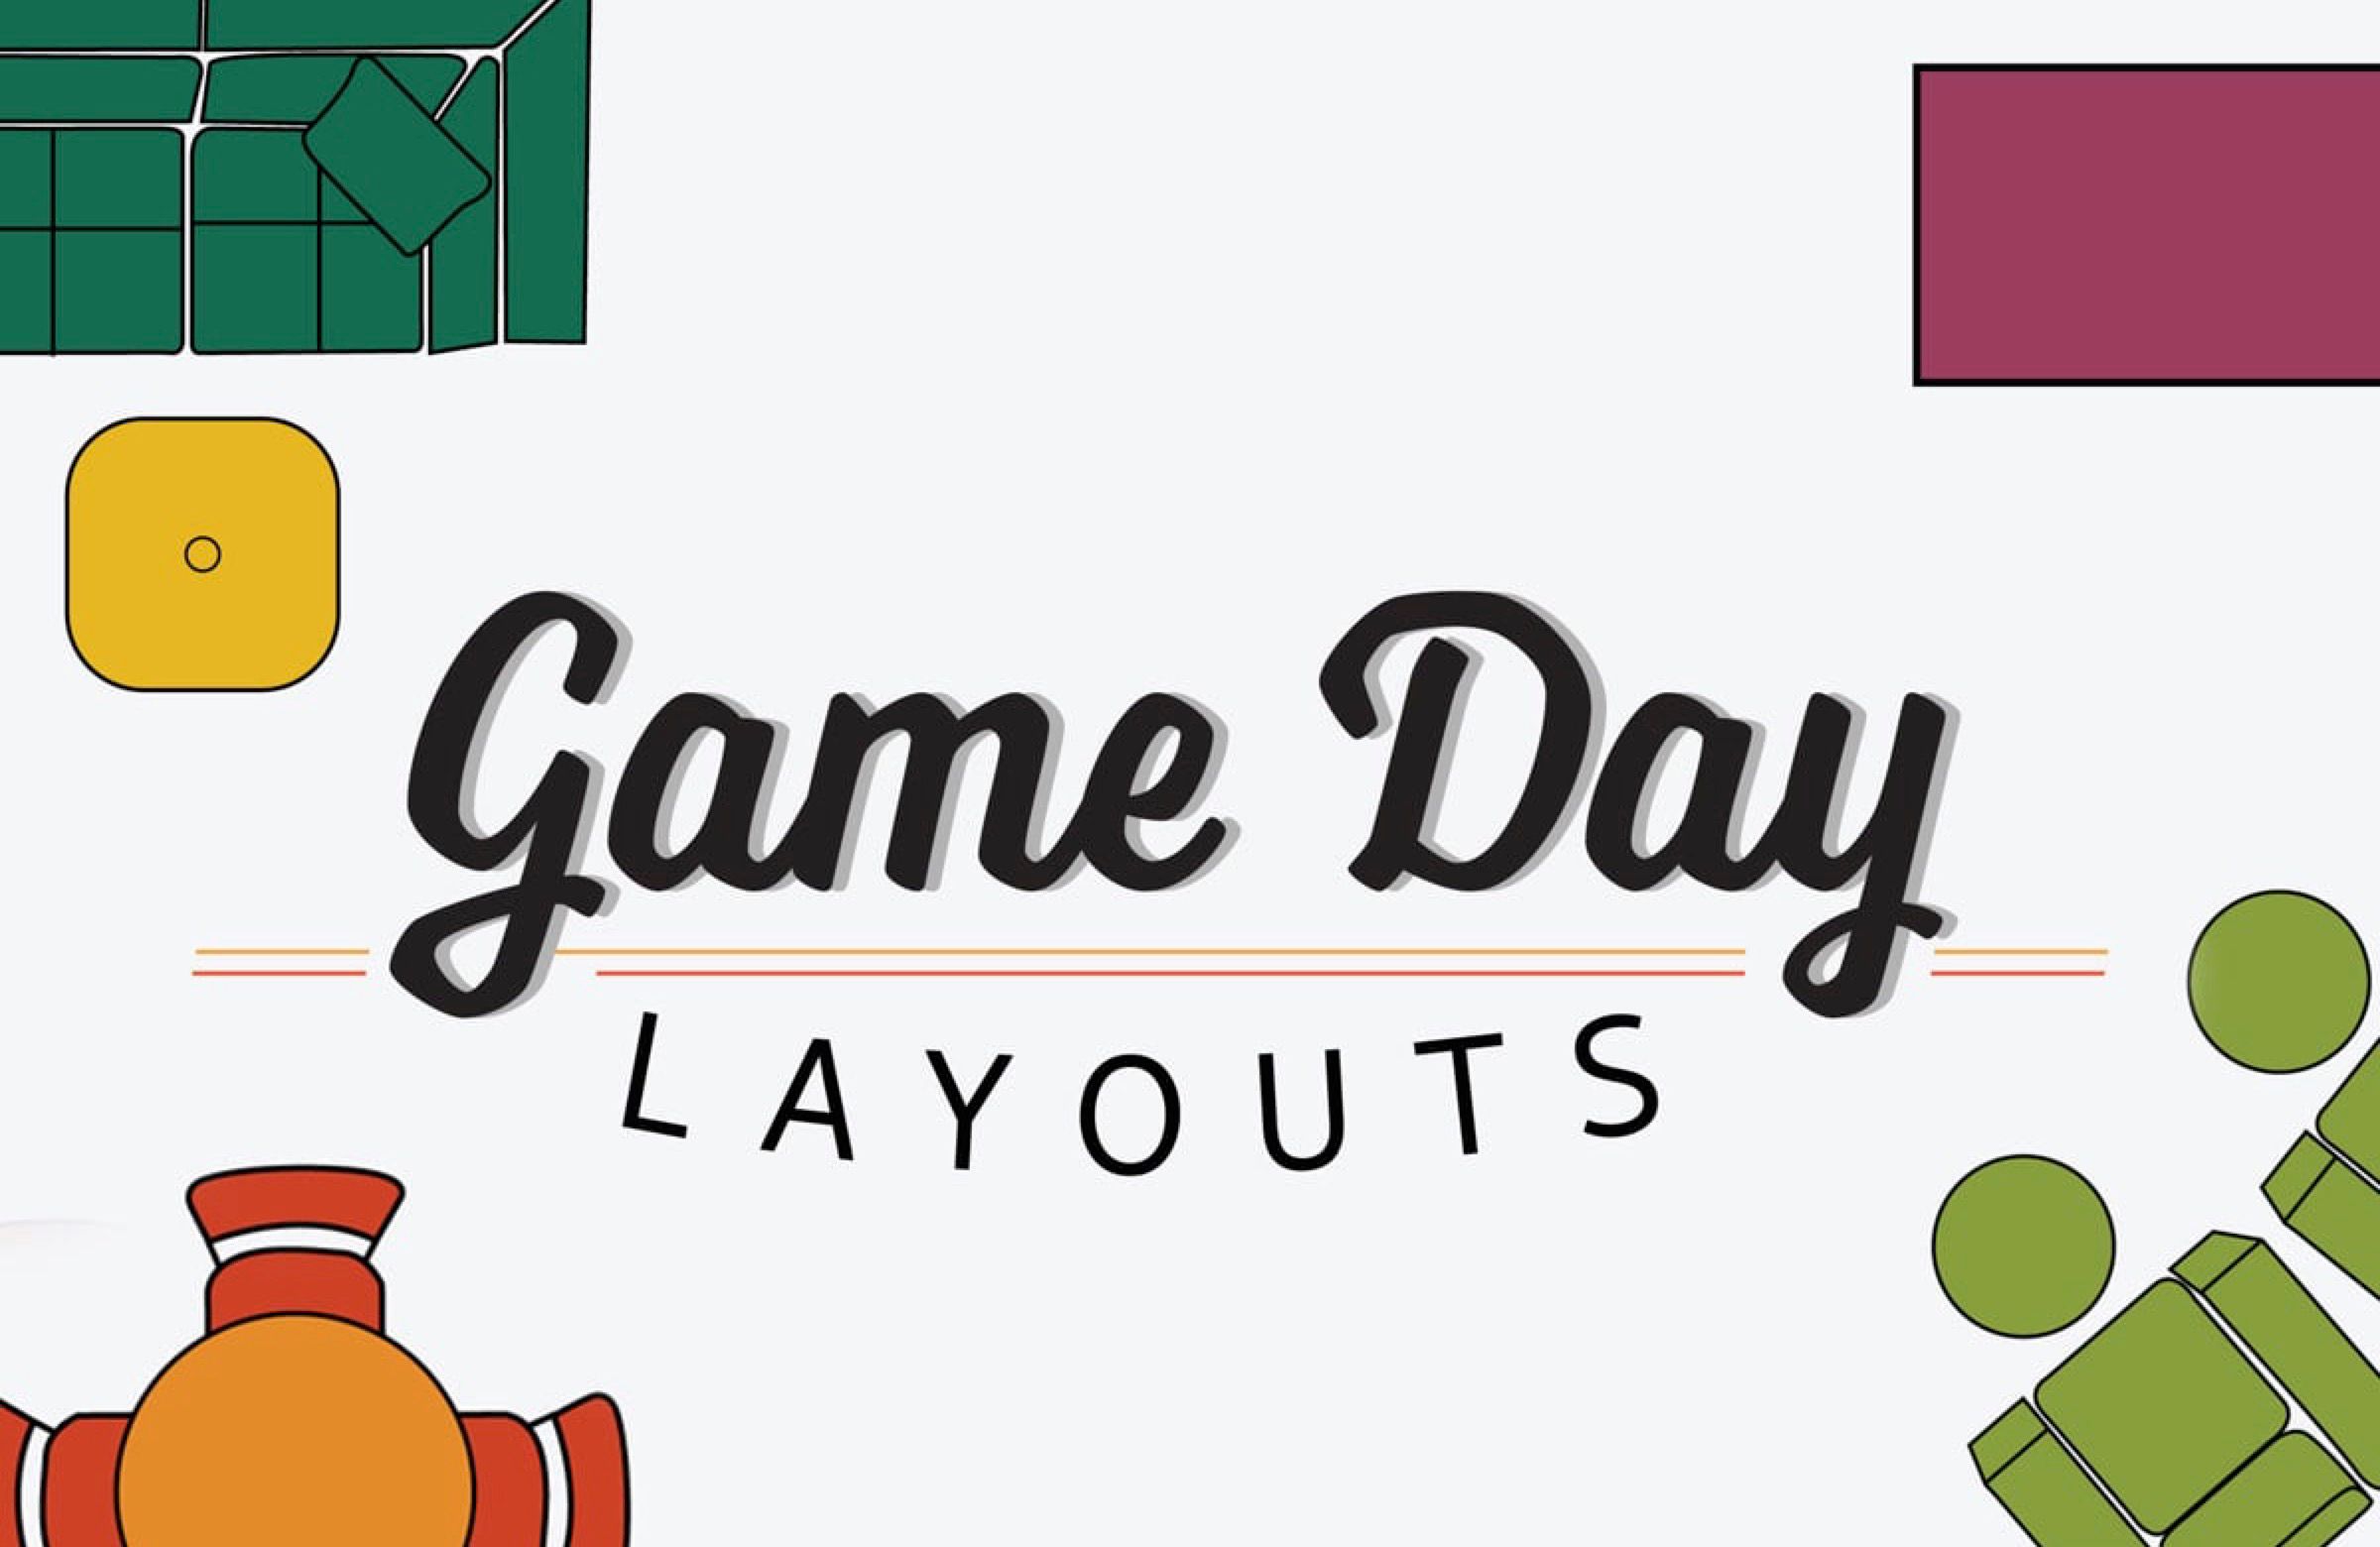 Football Game Day Layout Guide